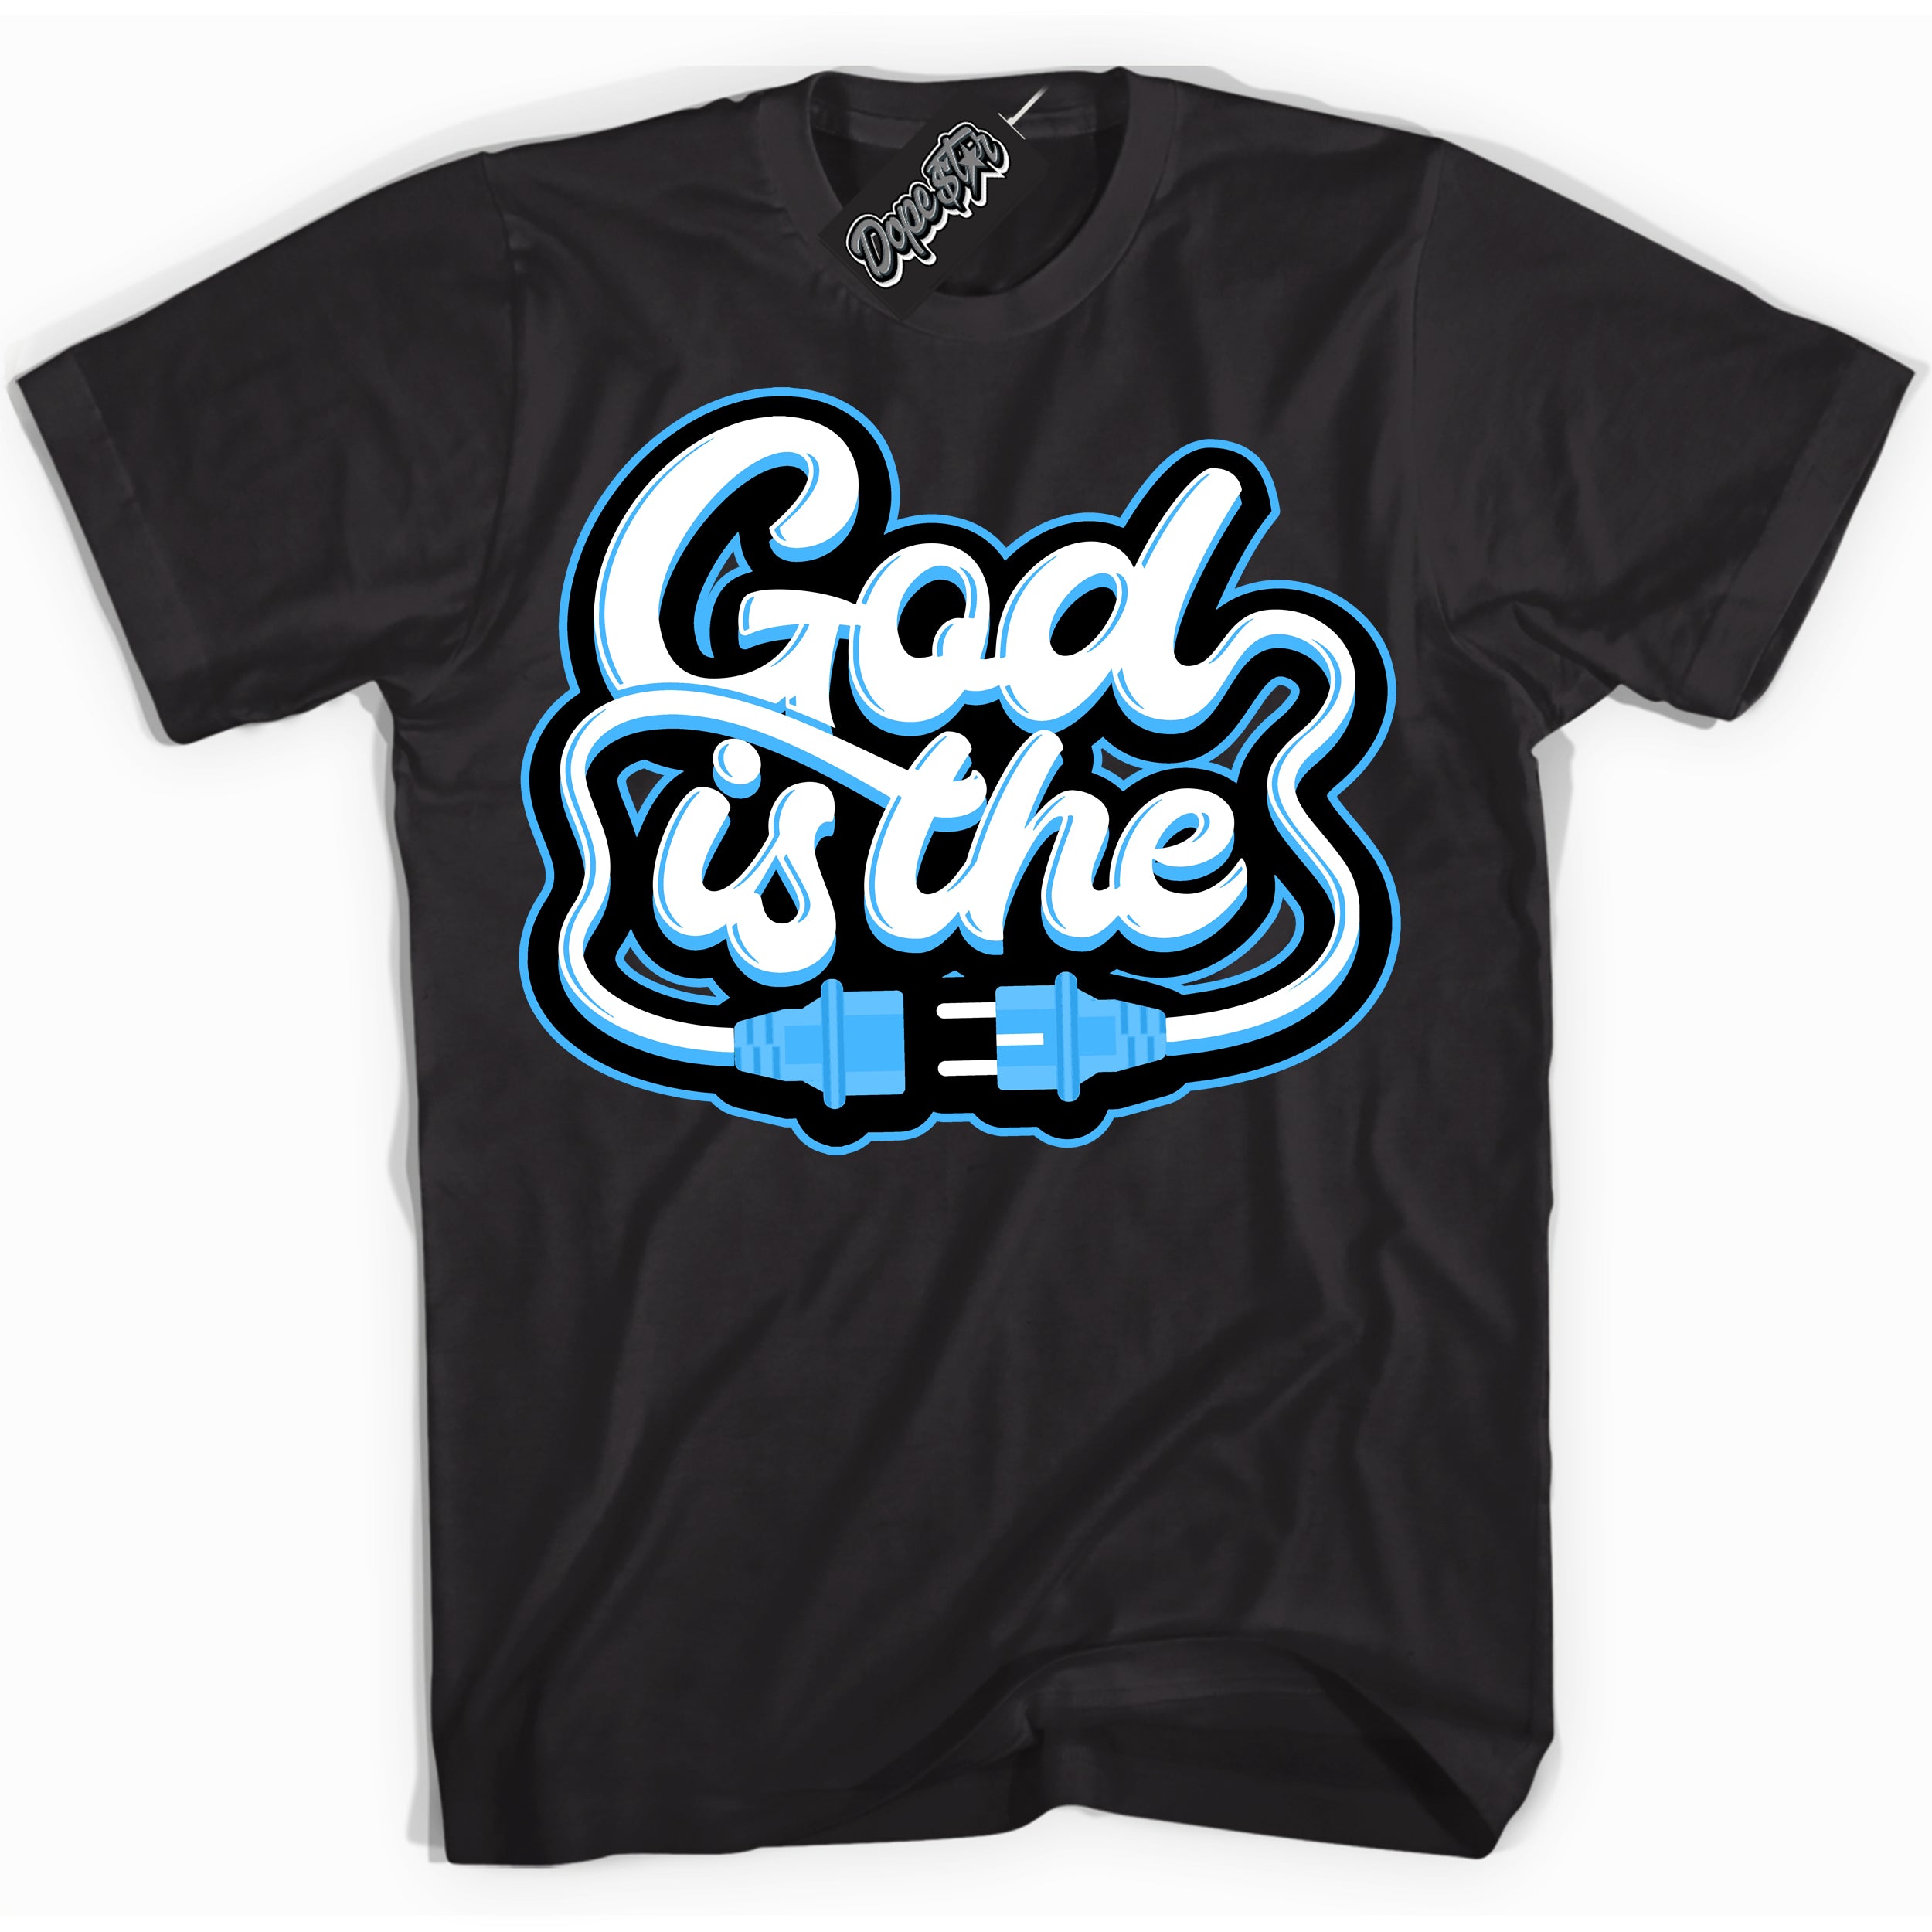 Cool Black graphic tee with “ God Is The ” design, that perfectly matches Powder Blue 9s sneakers 